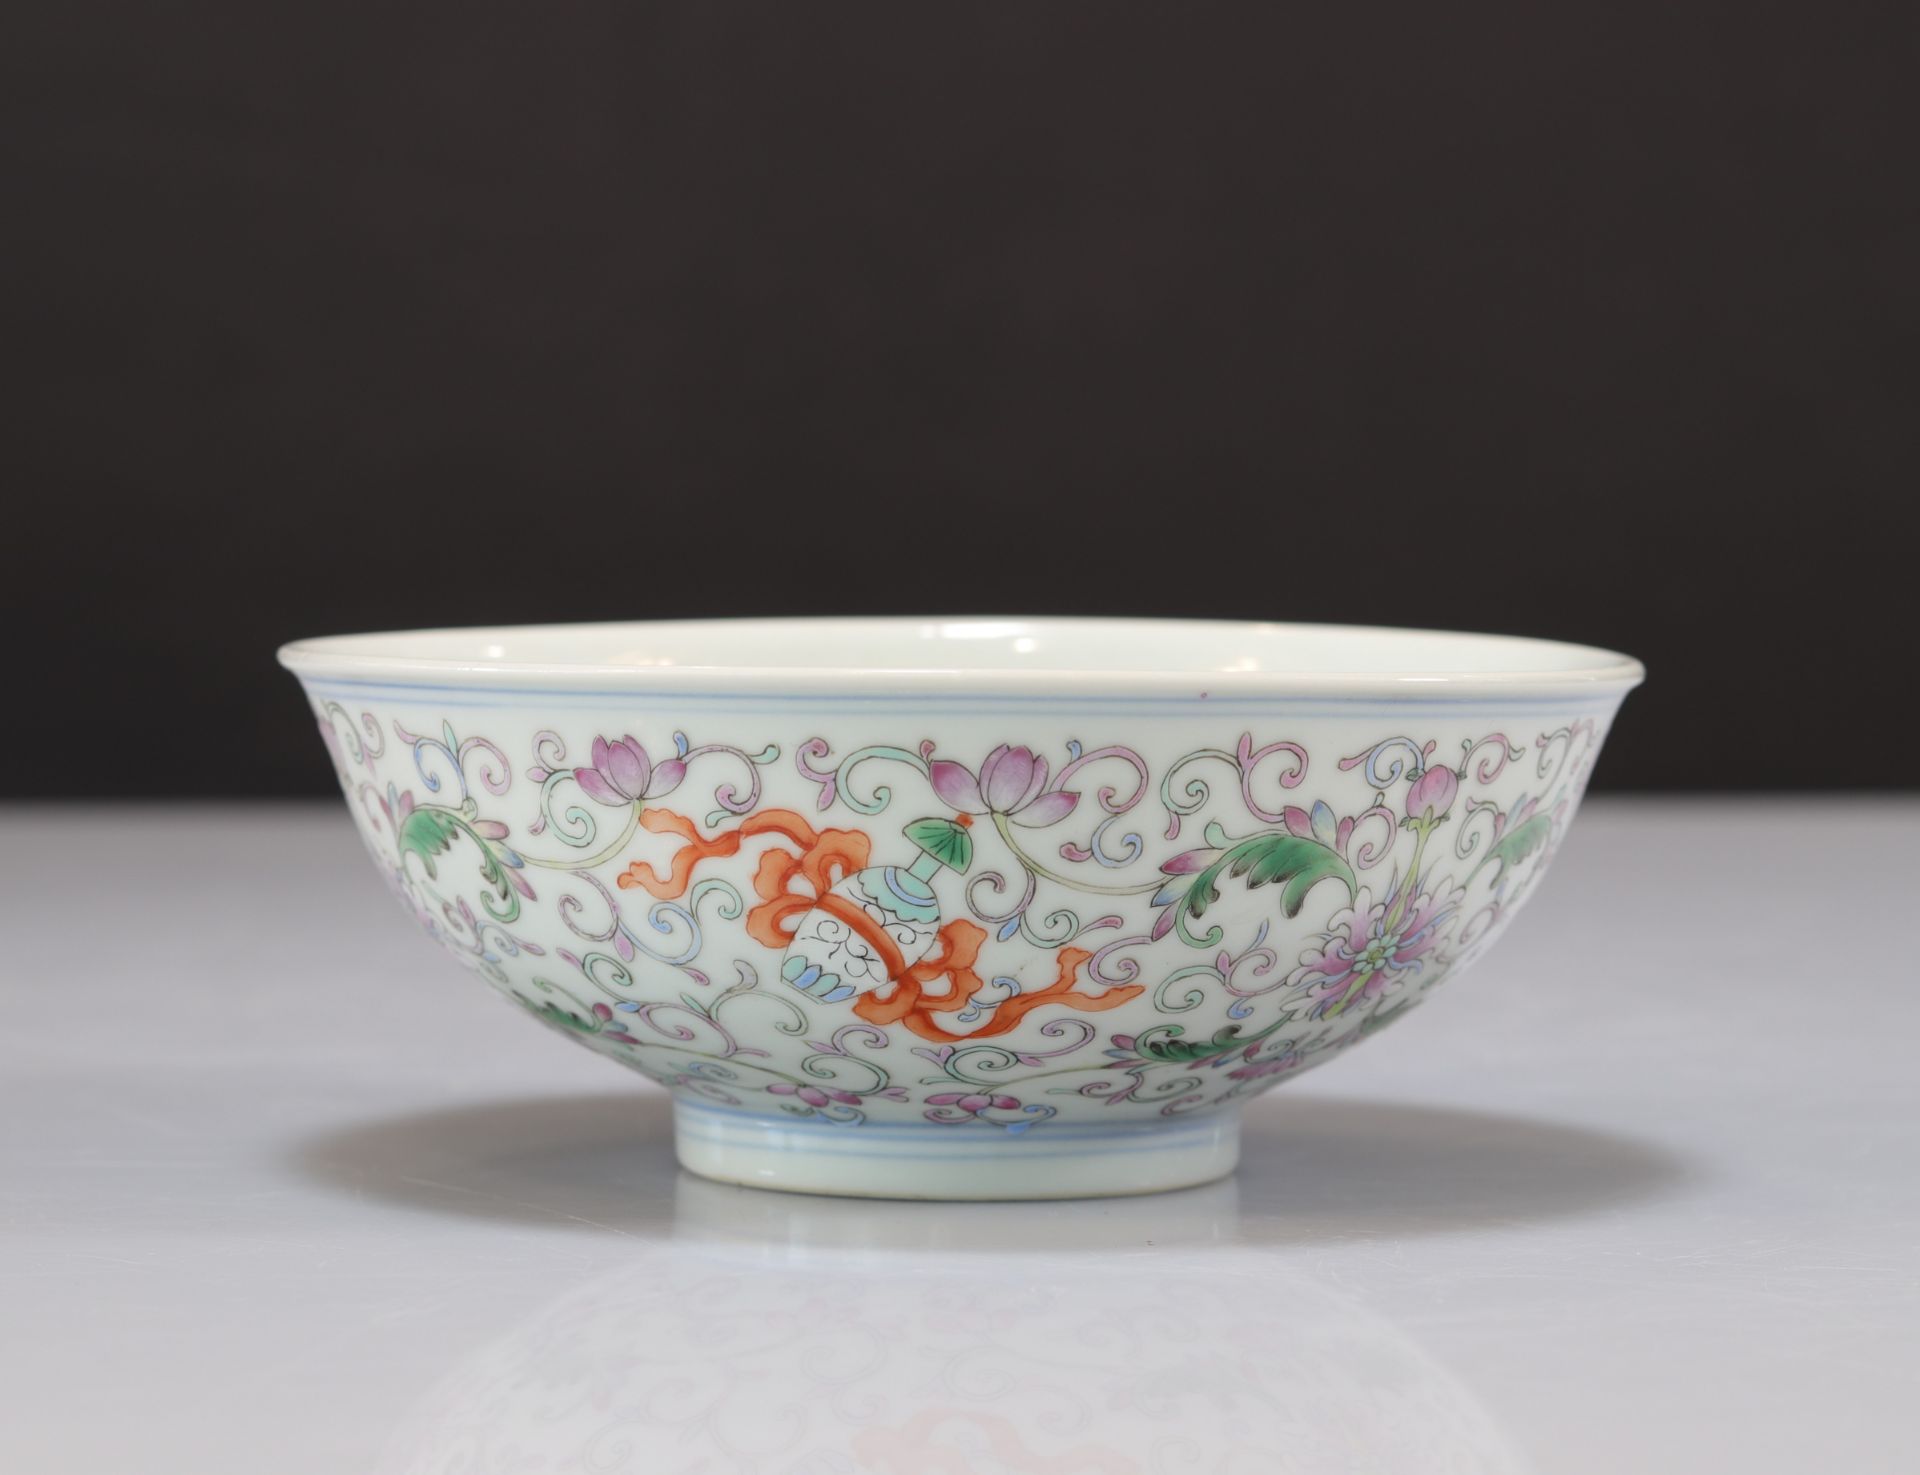 Important famille rose porcelain bowl decorated with bats